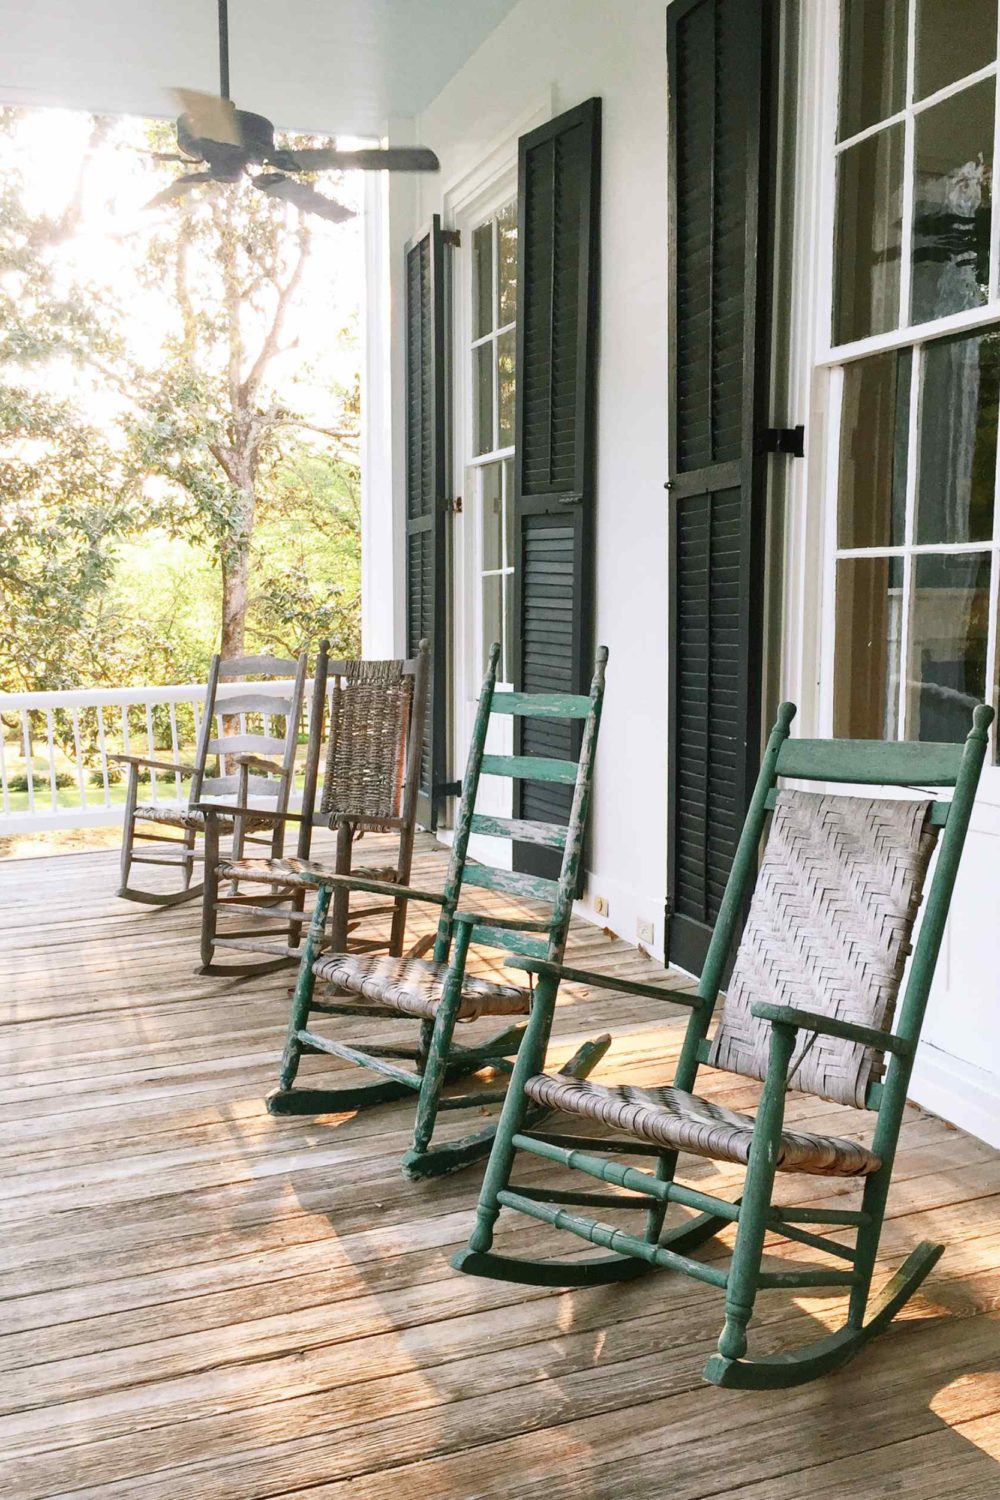 The Art of Porch Sitting with a Twist of Lemonade and Laughter